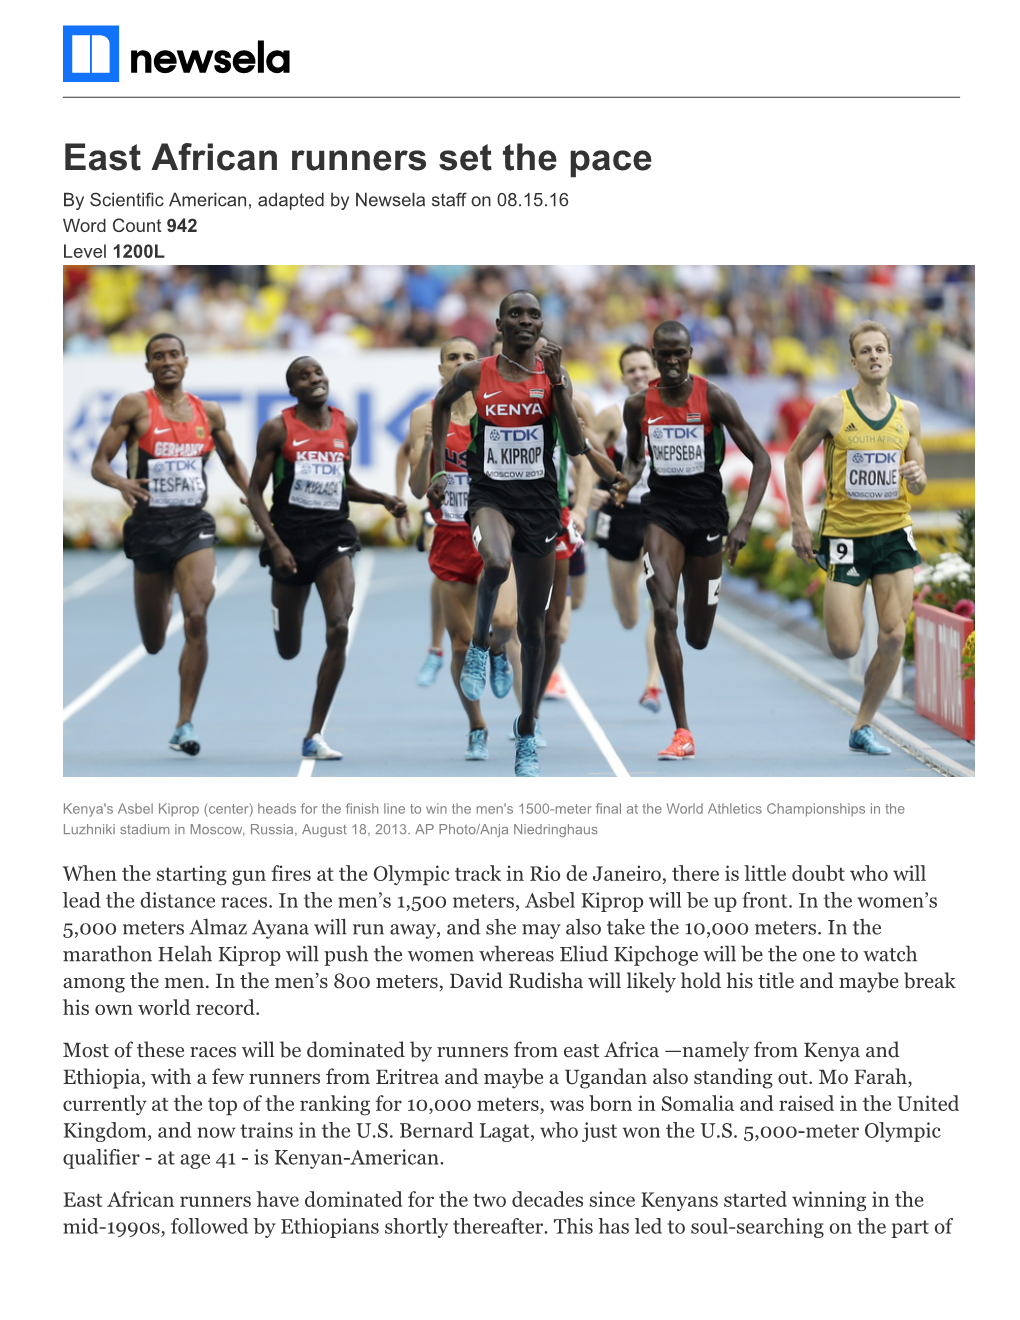 East African Runners Set the Pace by Scientific American, Adapted by Newsela Staff on 08.15.16 Word Count 942 Level 1200L